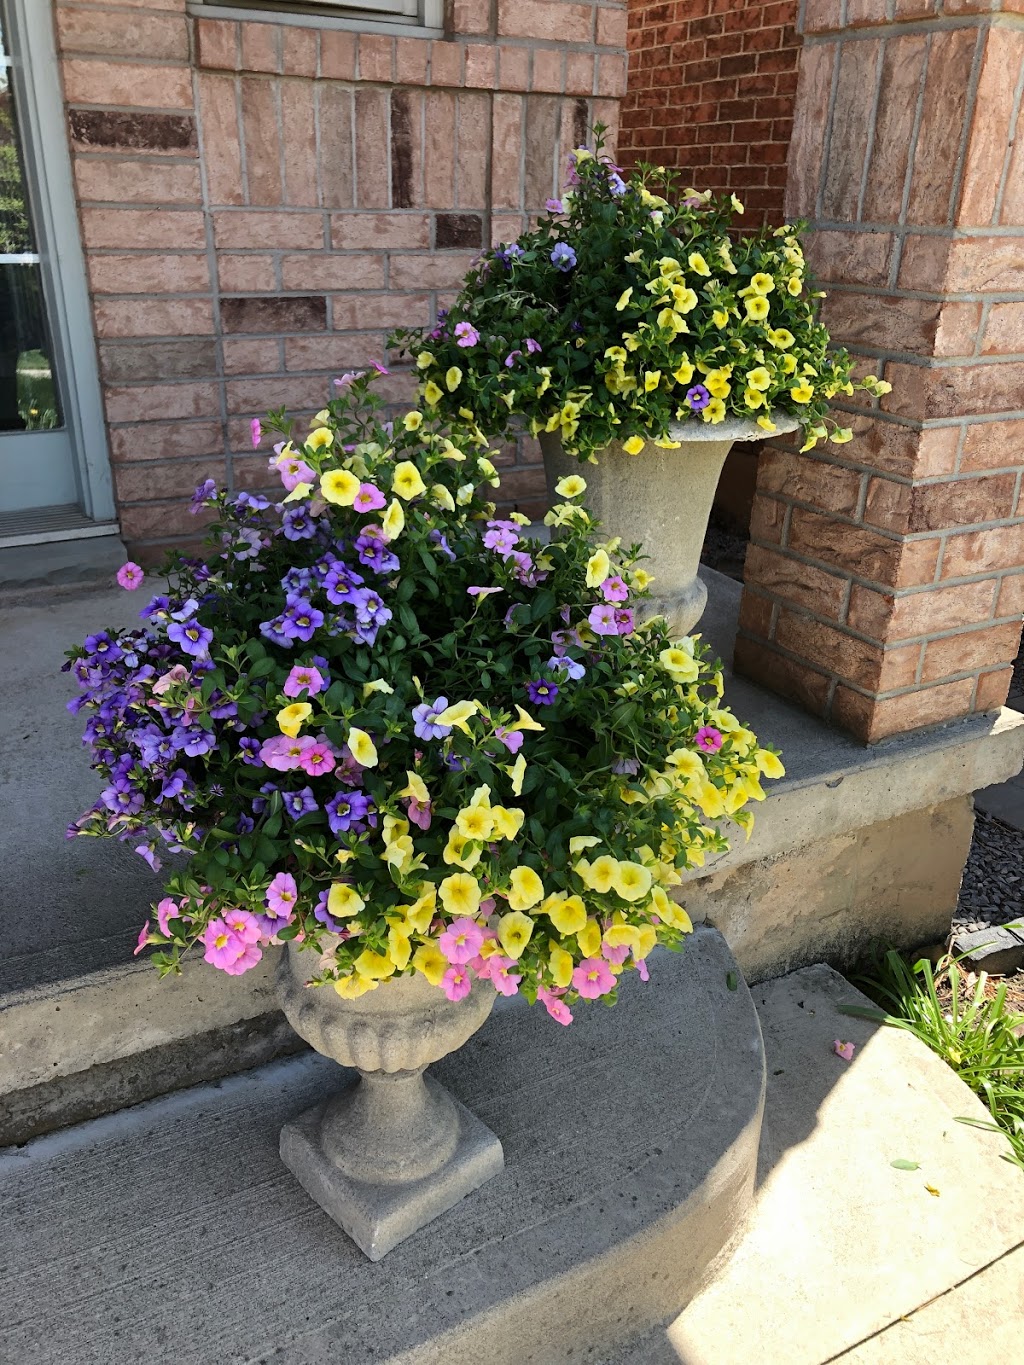 Bulow Garden Centre and Landscaping Oakville | store | 370 S Service Rd W, Oakville, ON L6K 3S1, Canada | 9058457121 OR +1 905-845-7121